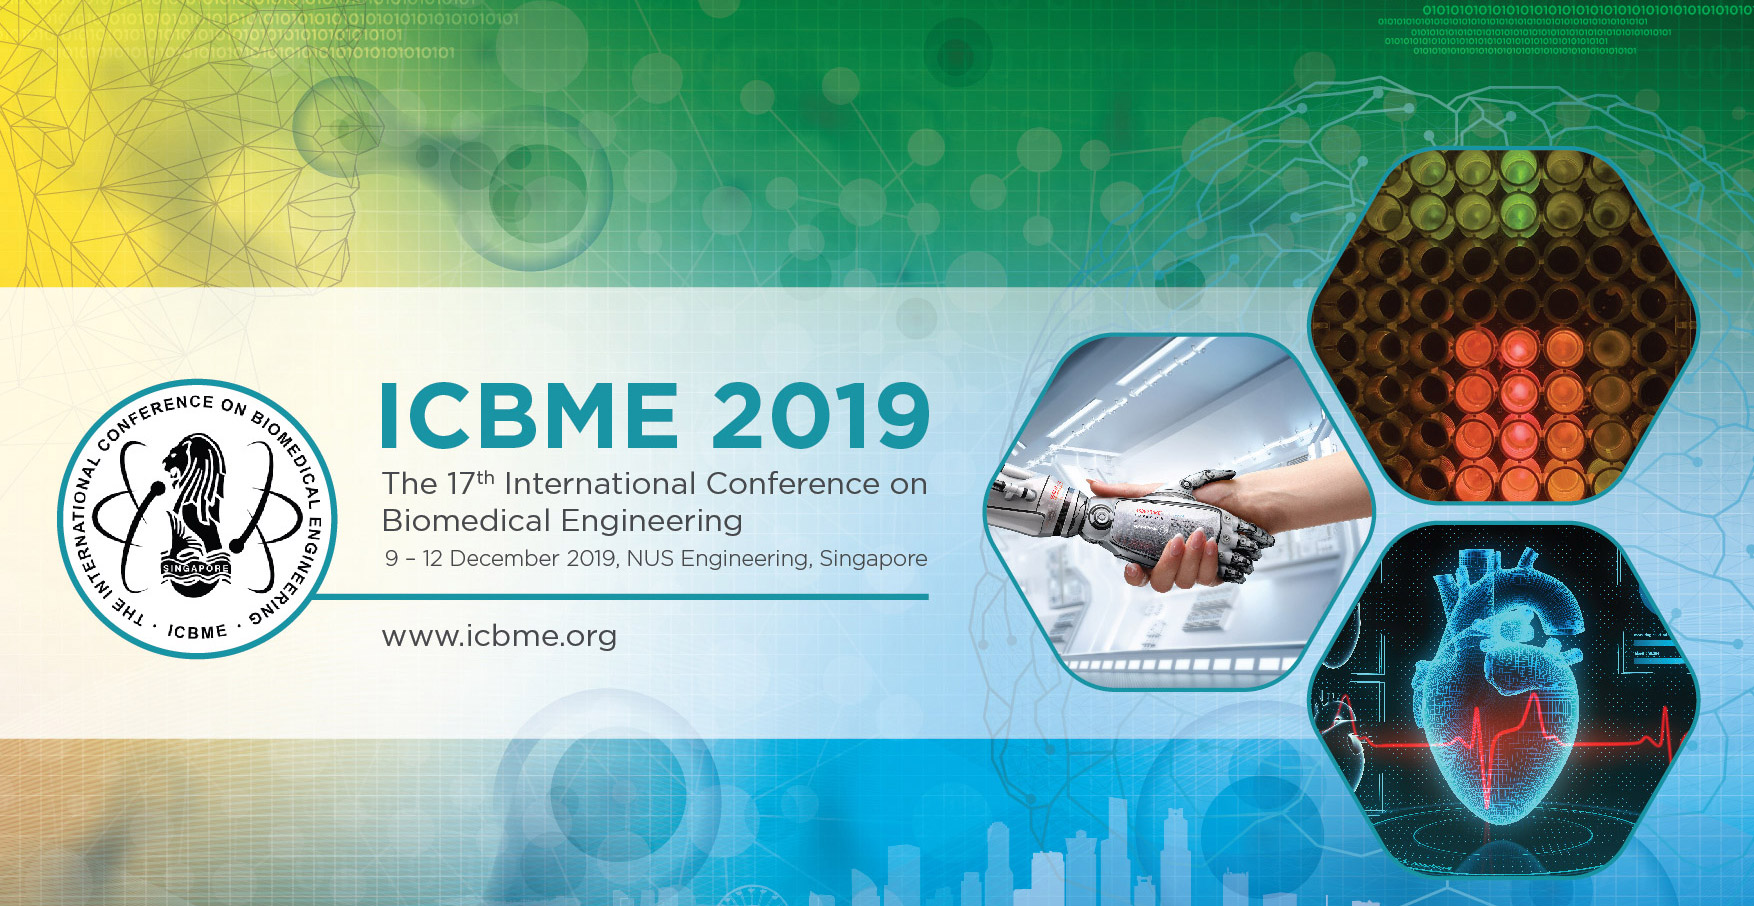 The 17th International Conference on Biomedical Engineering (ICBME